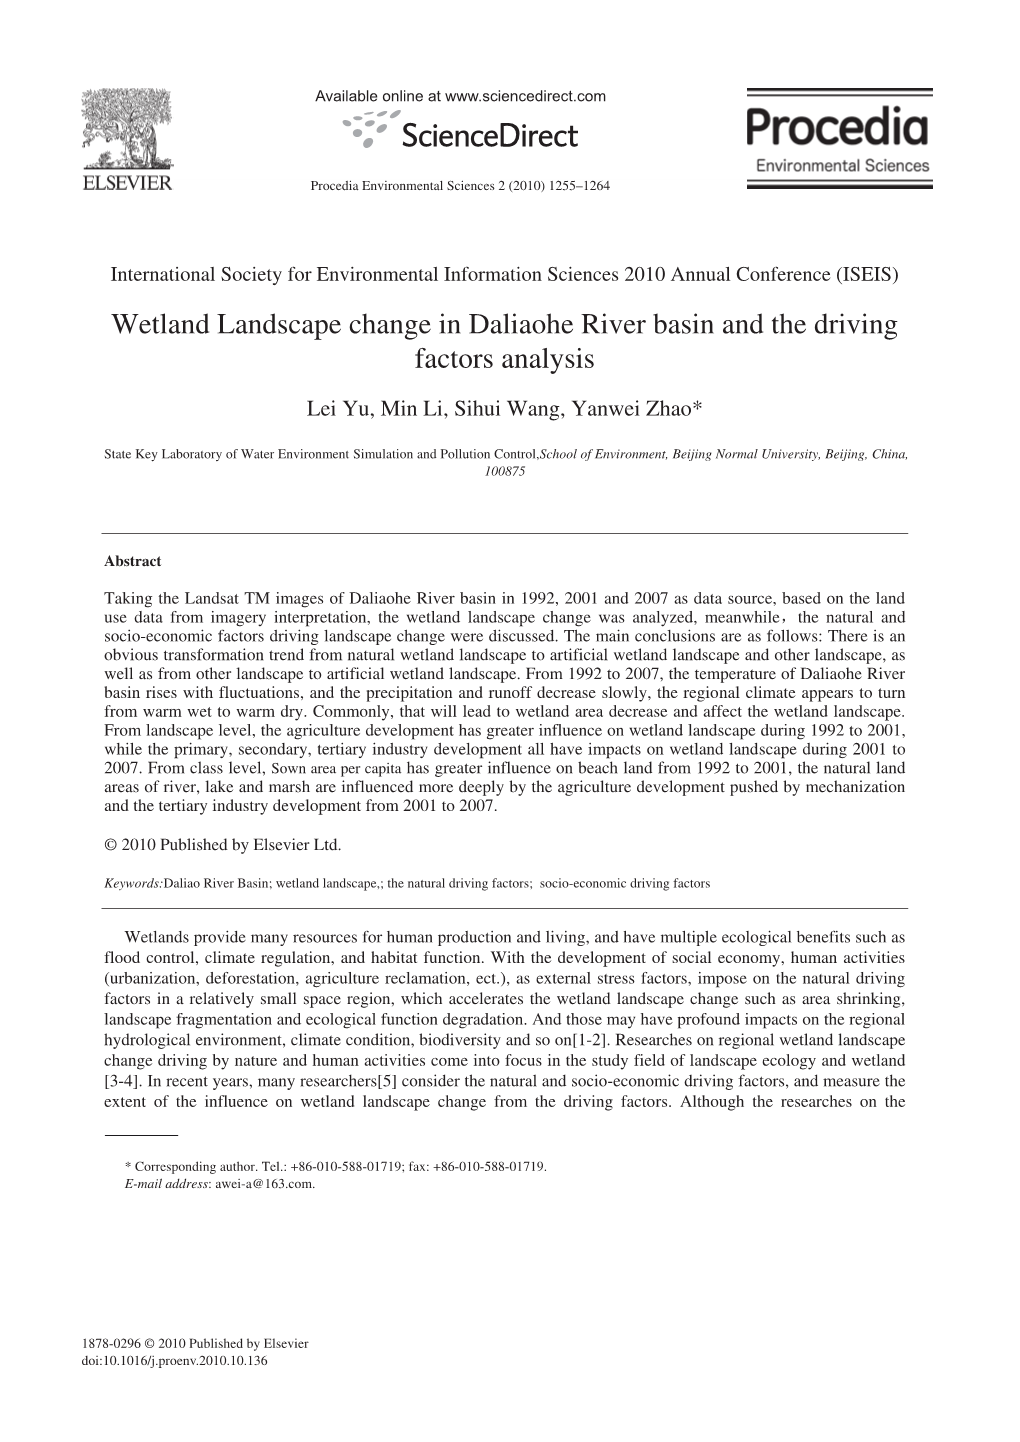 Wetland Landscape Change in Daliaohe River Basin and the Driving Factors Analysis